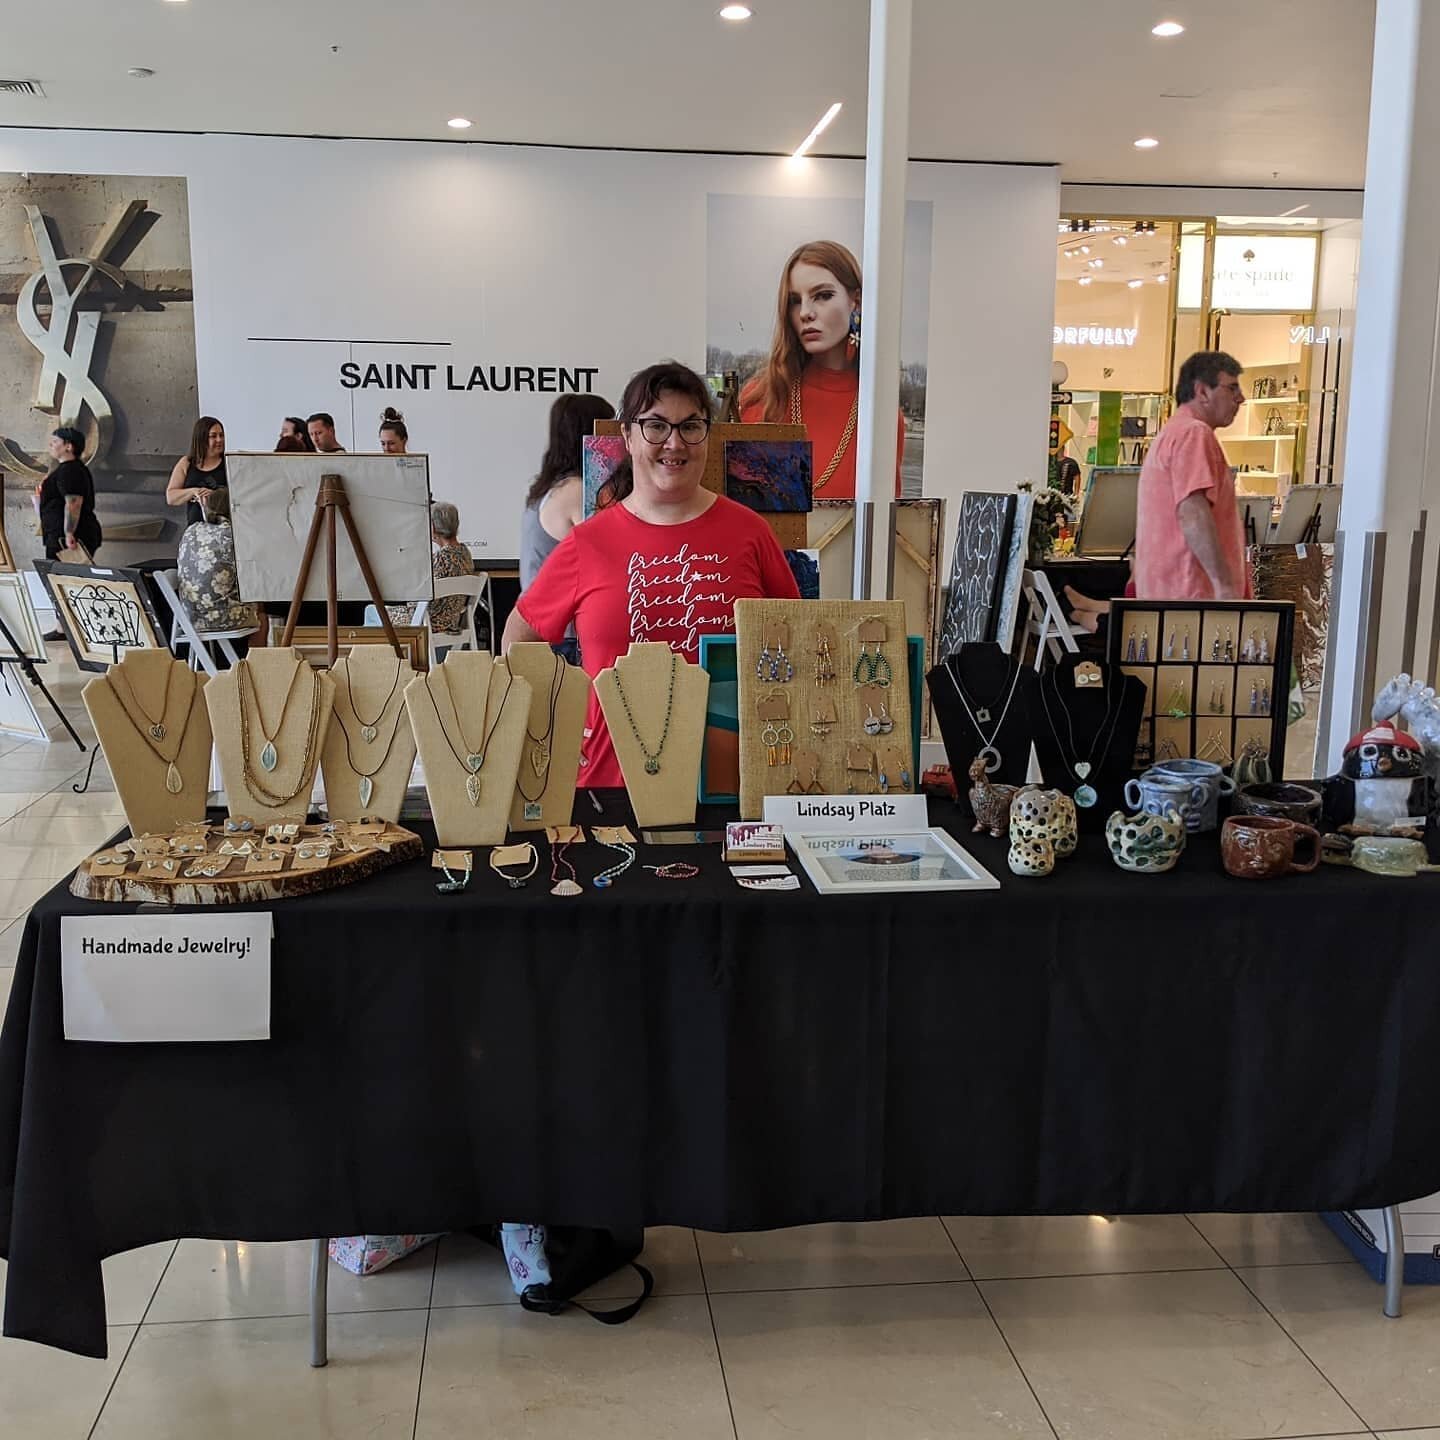 Come out to check out Lindsay's beautiful jewelry and ceramics at the Galleria Mall art market this weekend! 💥💥